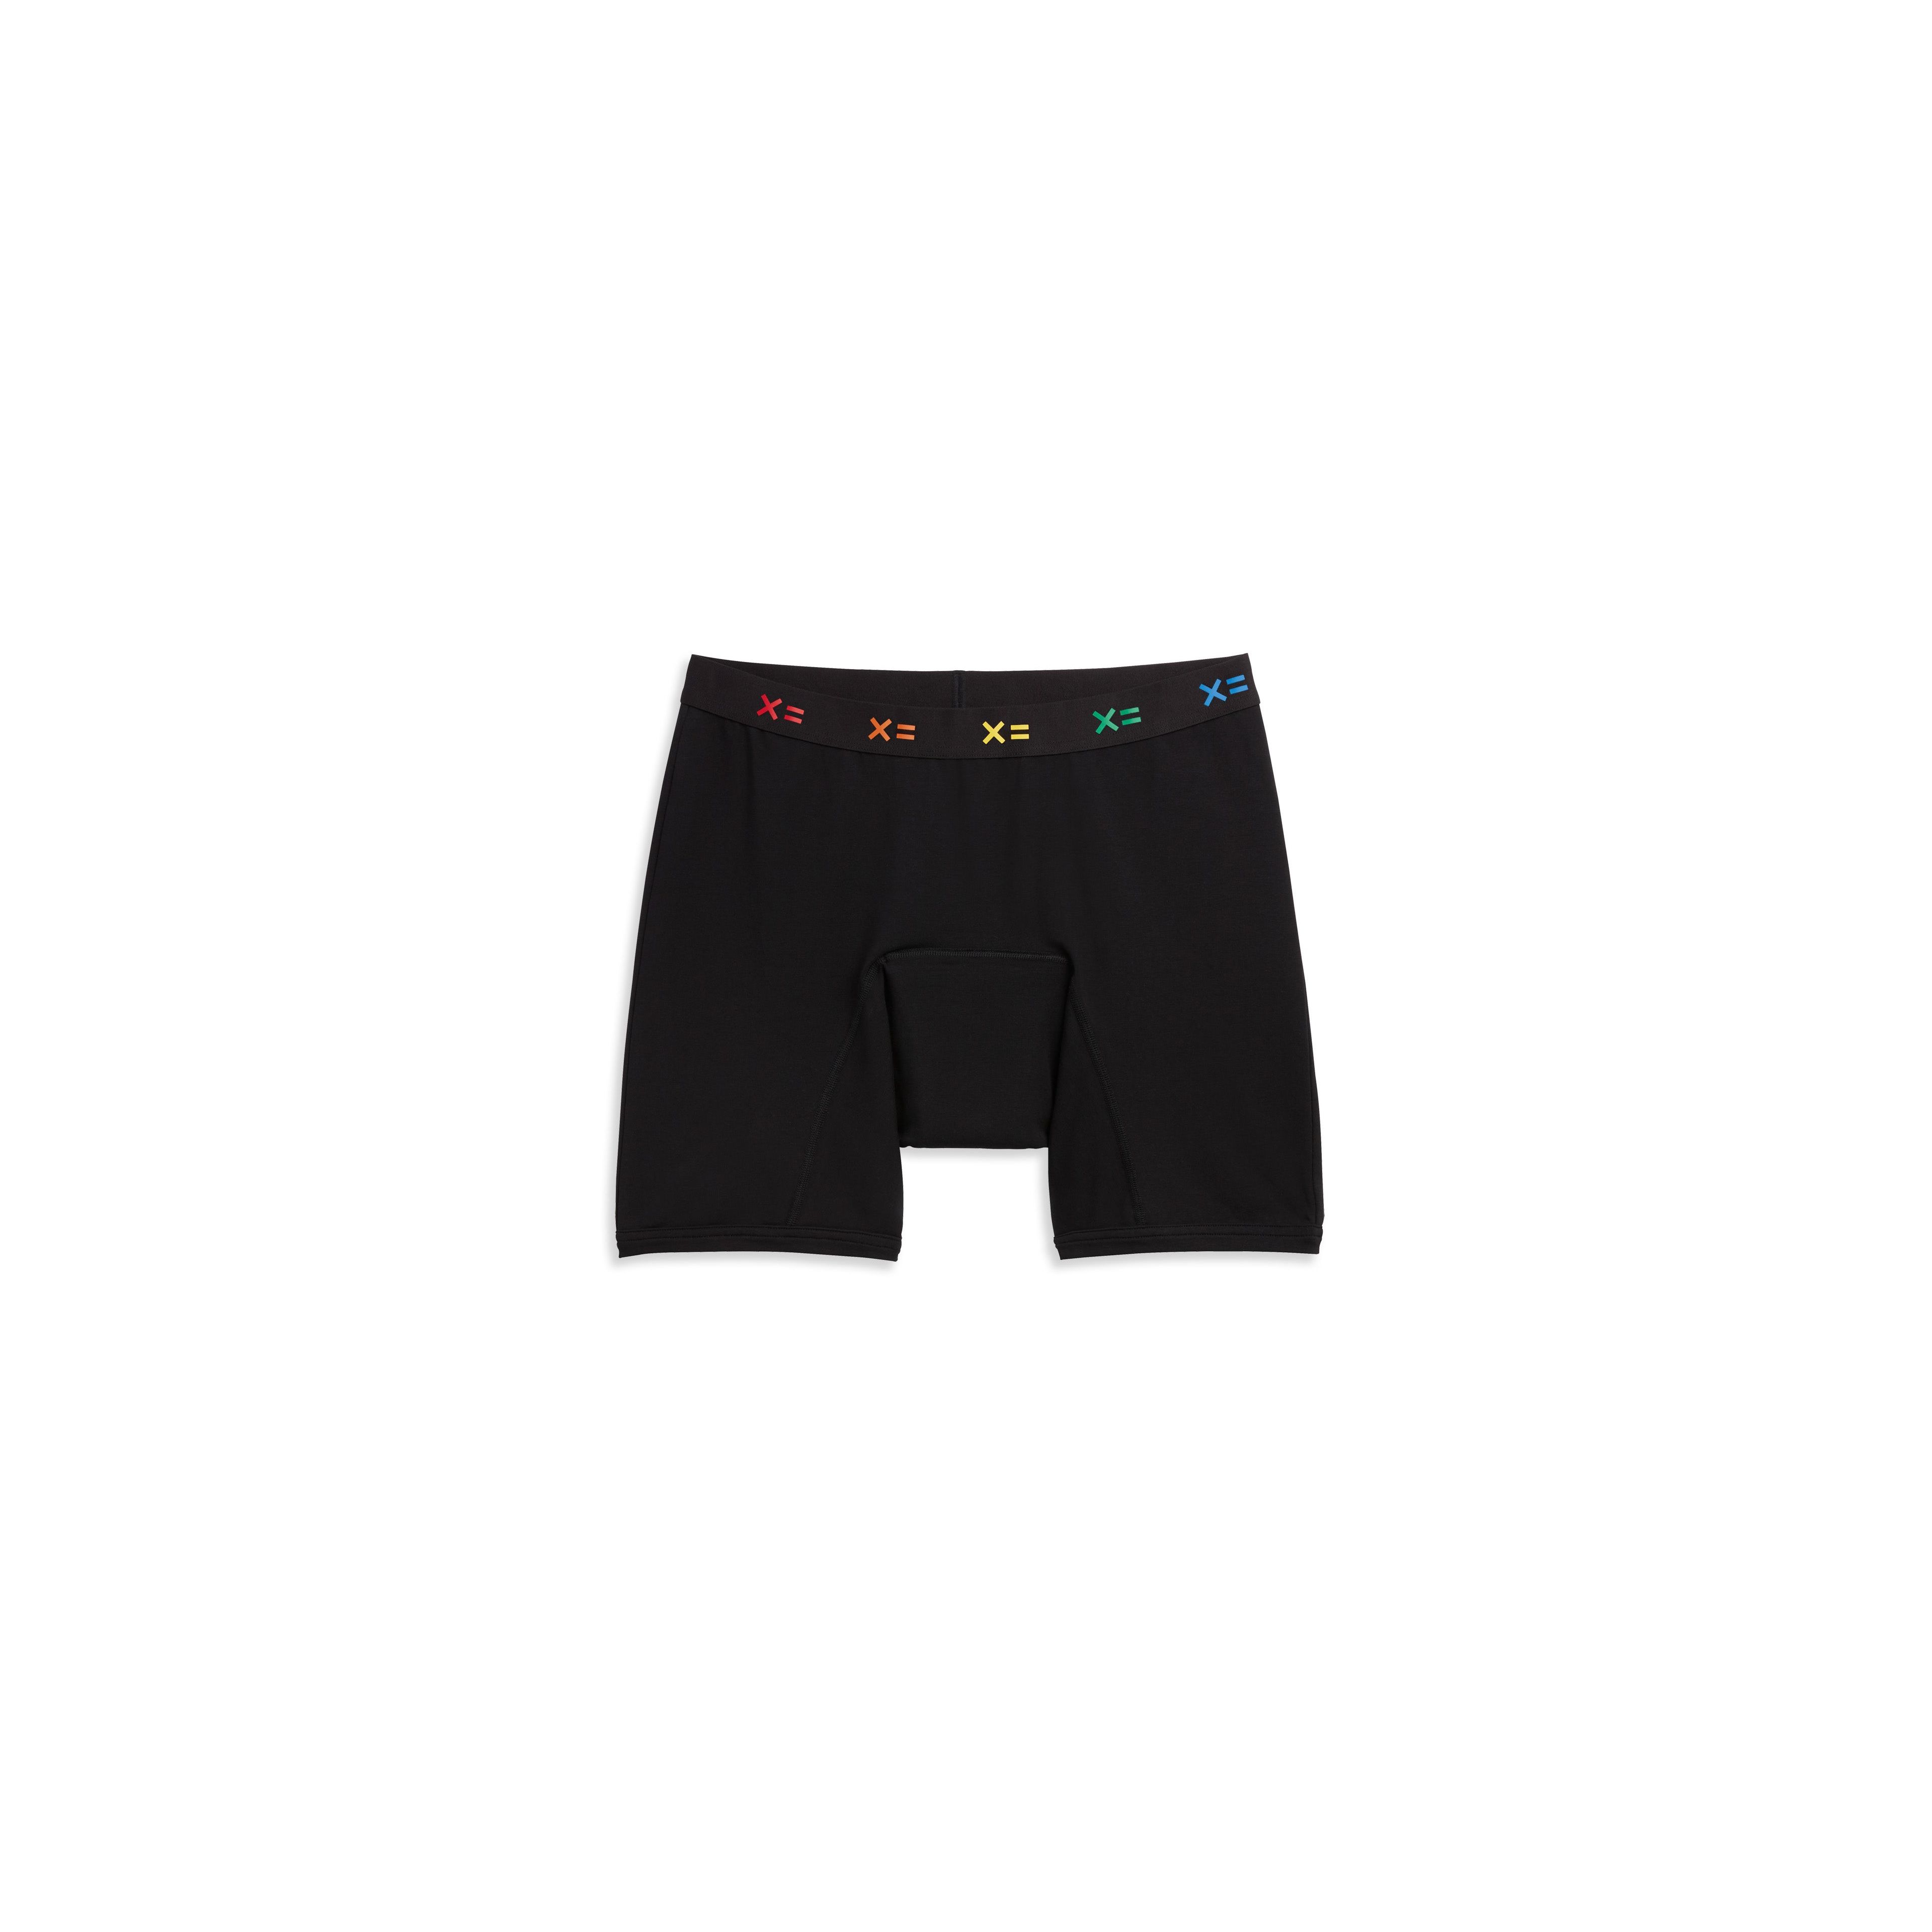 TomboyX First Line Period 9 Boxer Briefs - Black X= Rainbow on Marmalade